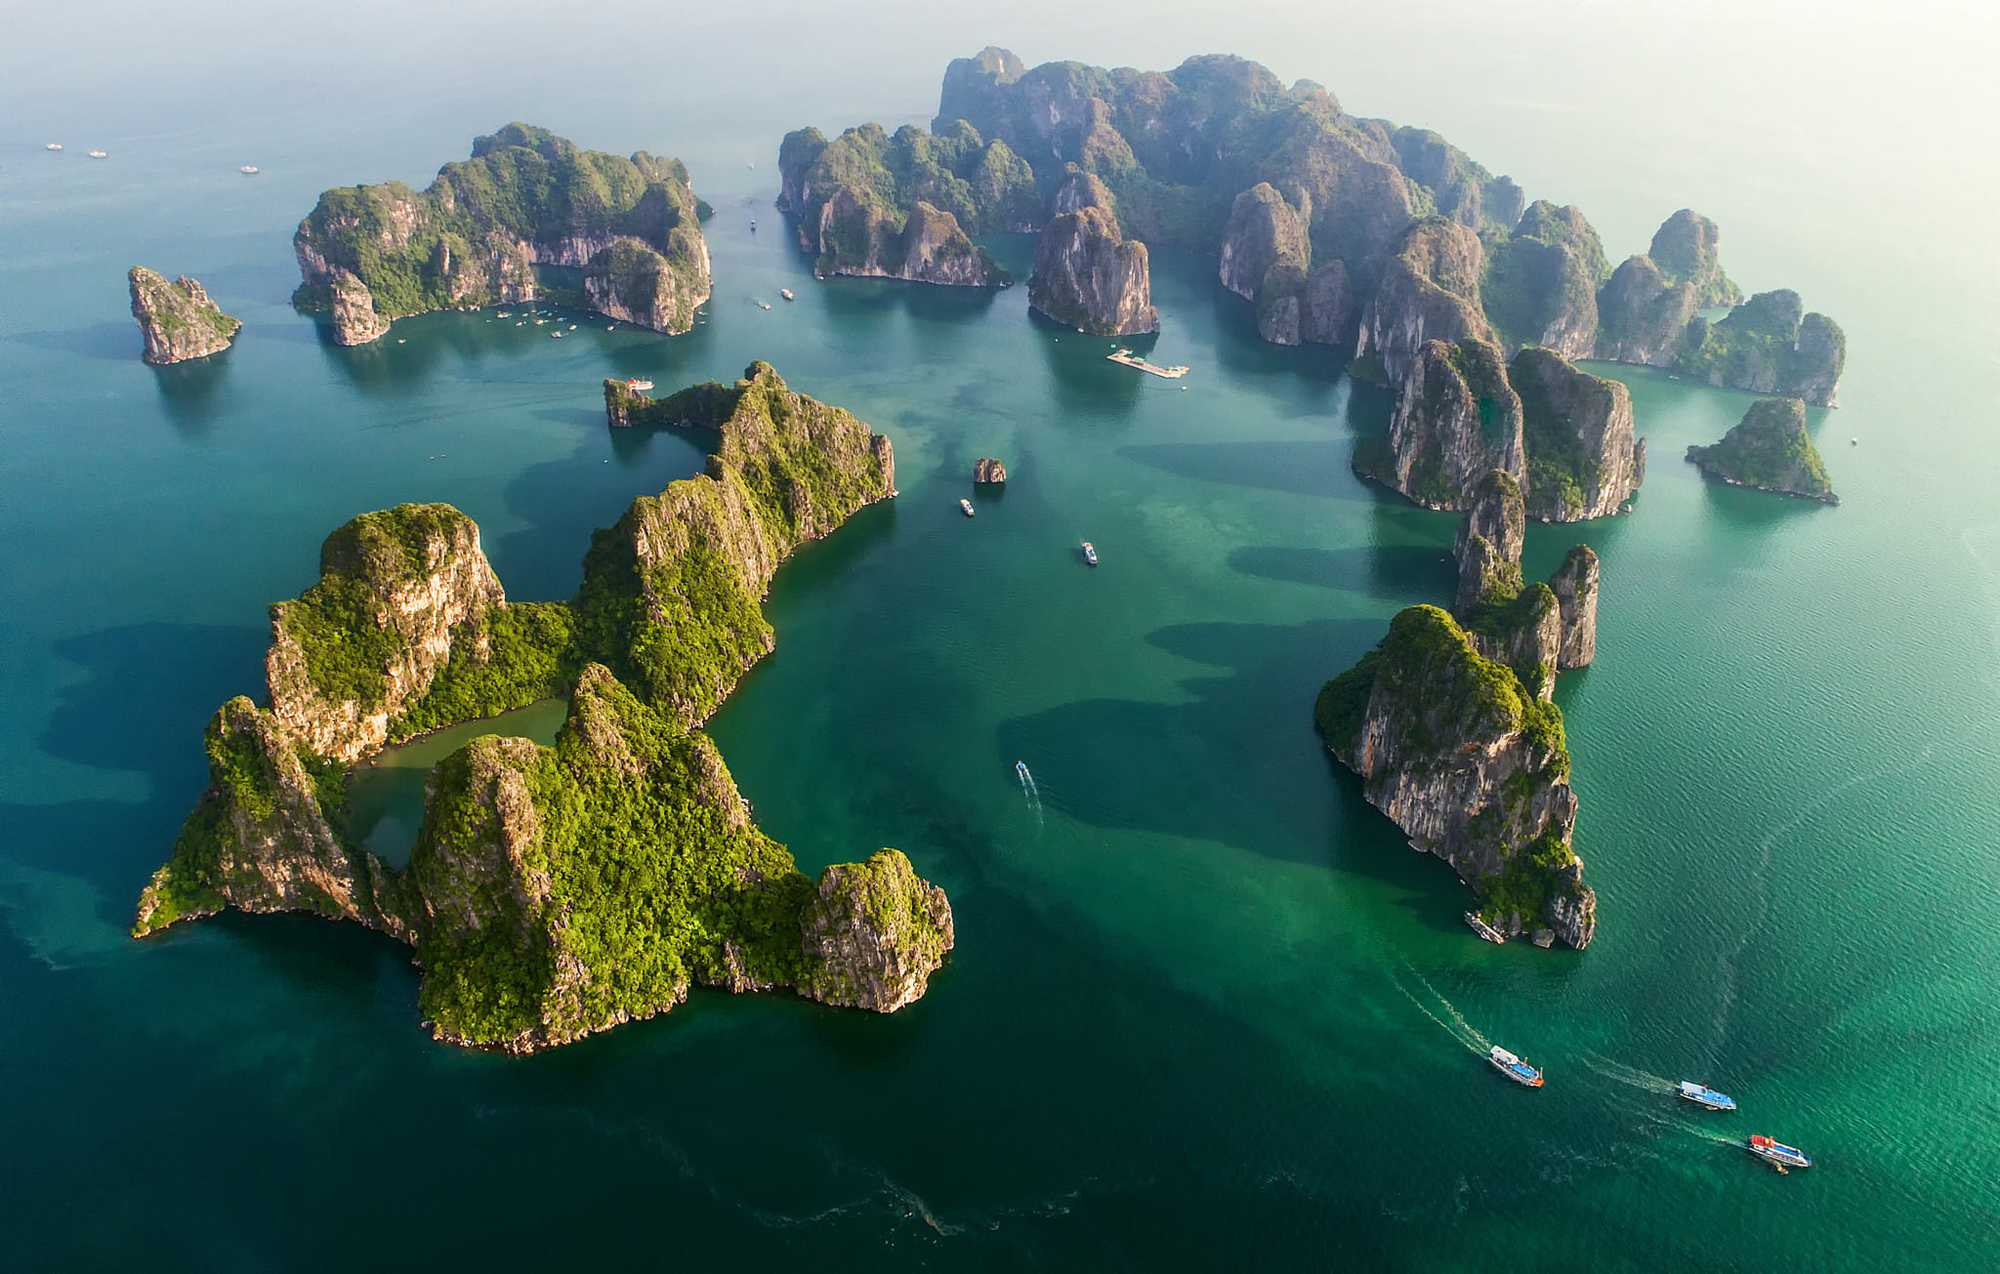 halong-bay-one-of-the-most-beautiful-bays-in-the-world-jptraveltime.jpg